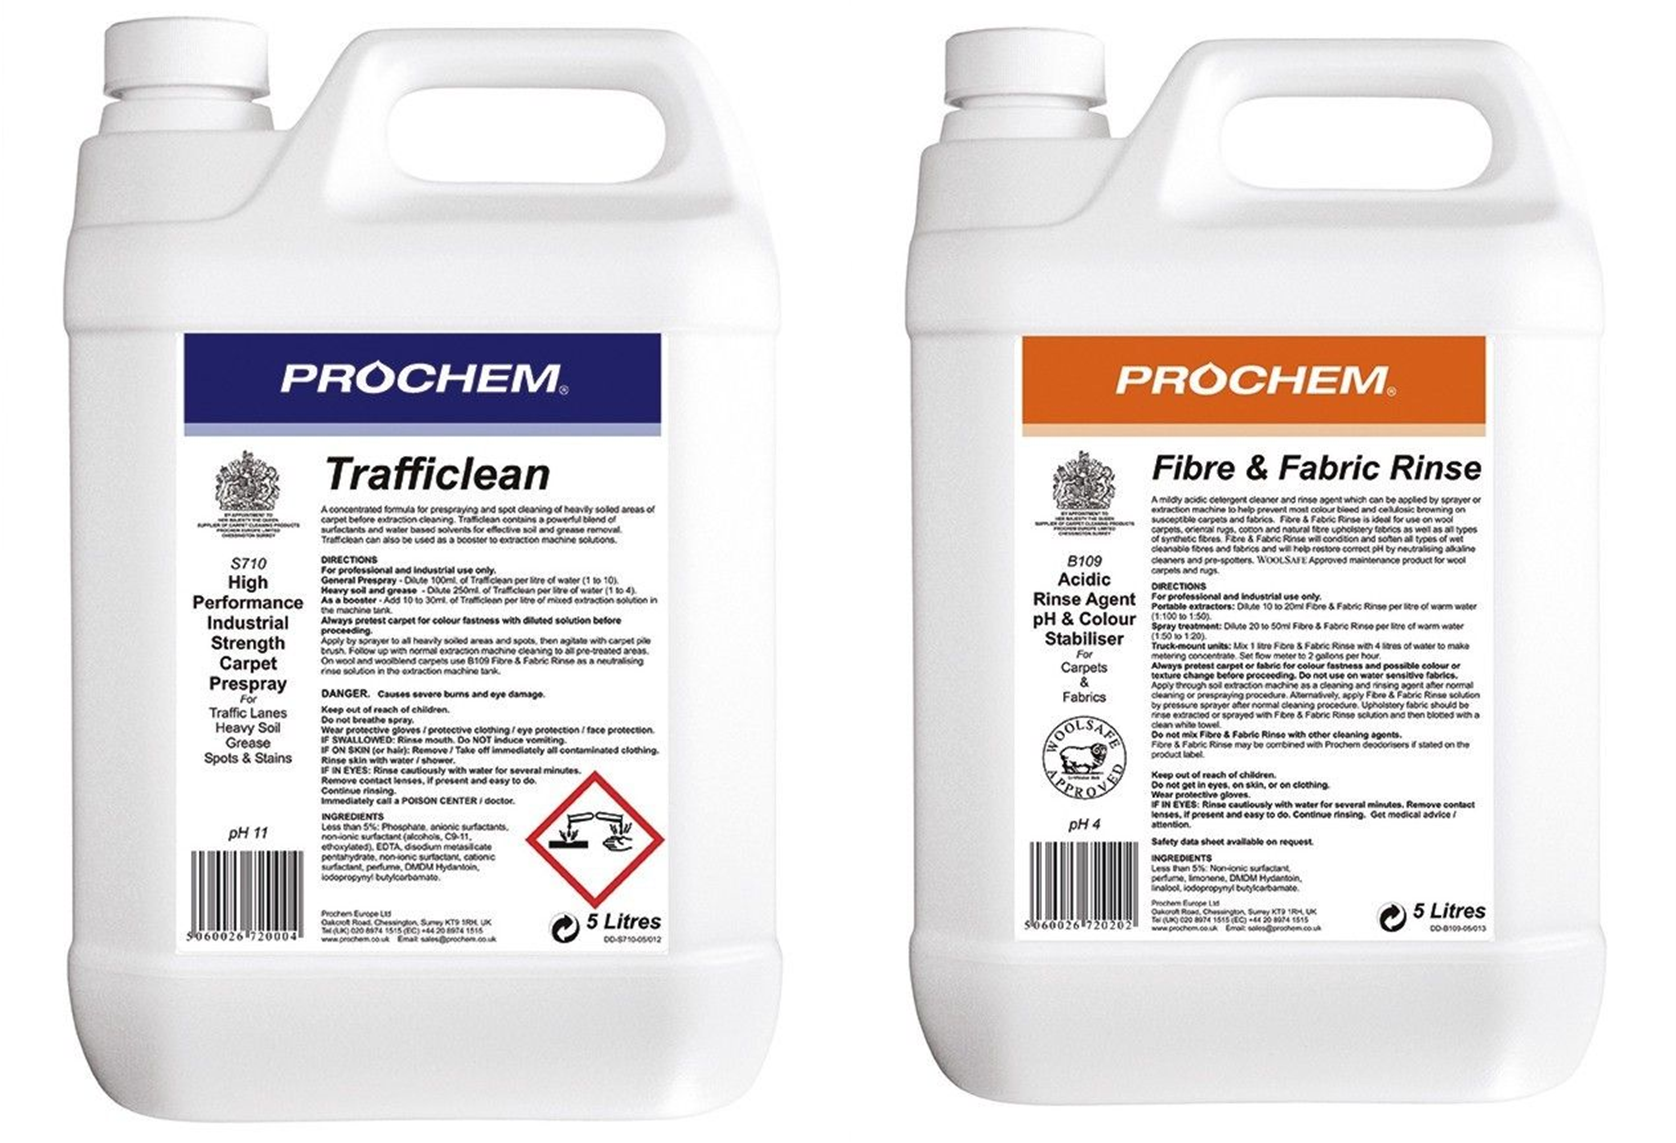 Trafficlean and Fibre & Fabric Rinse